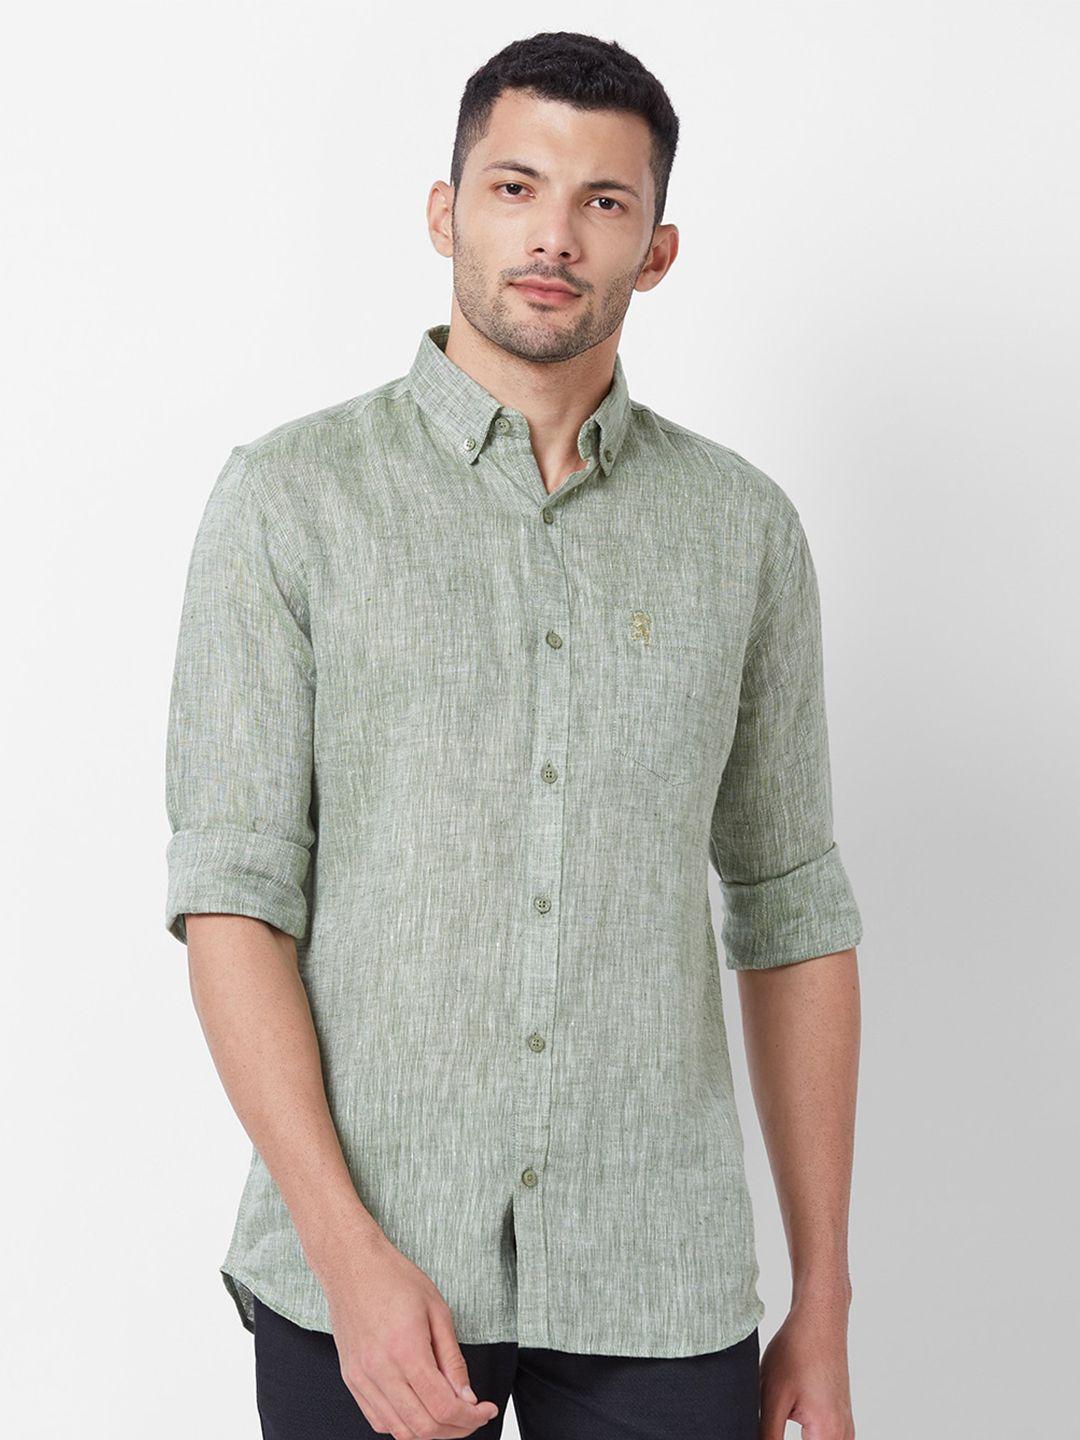 giordano-slim-fit-abstract-printed-button-down-collar-pure-cotton-casual-shirt